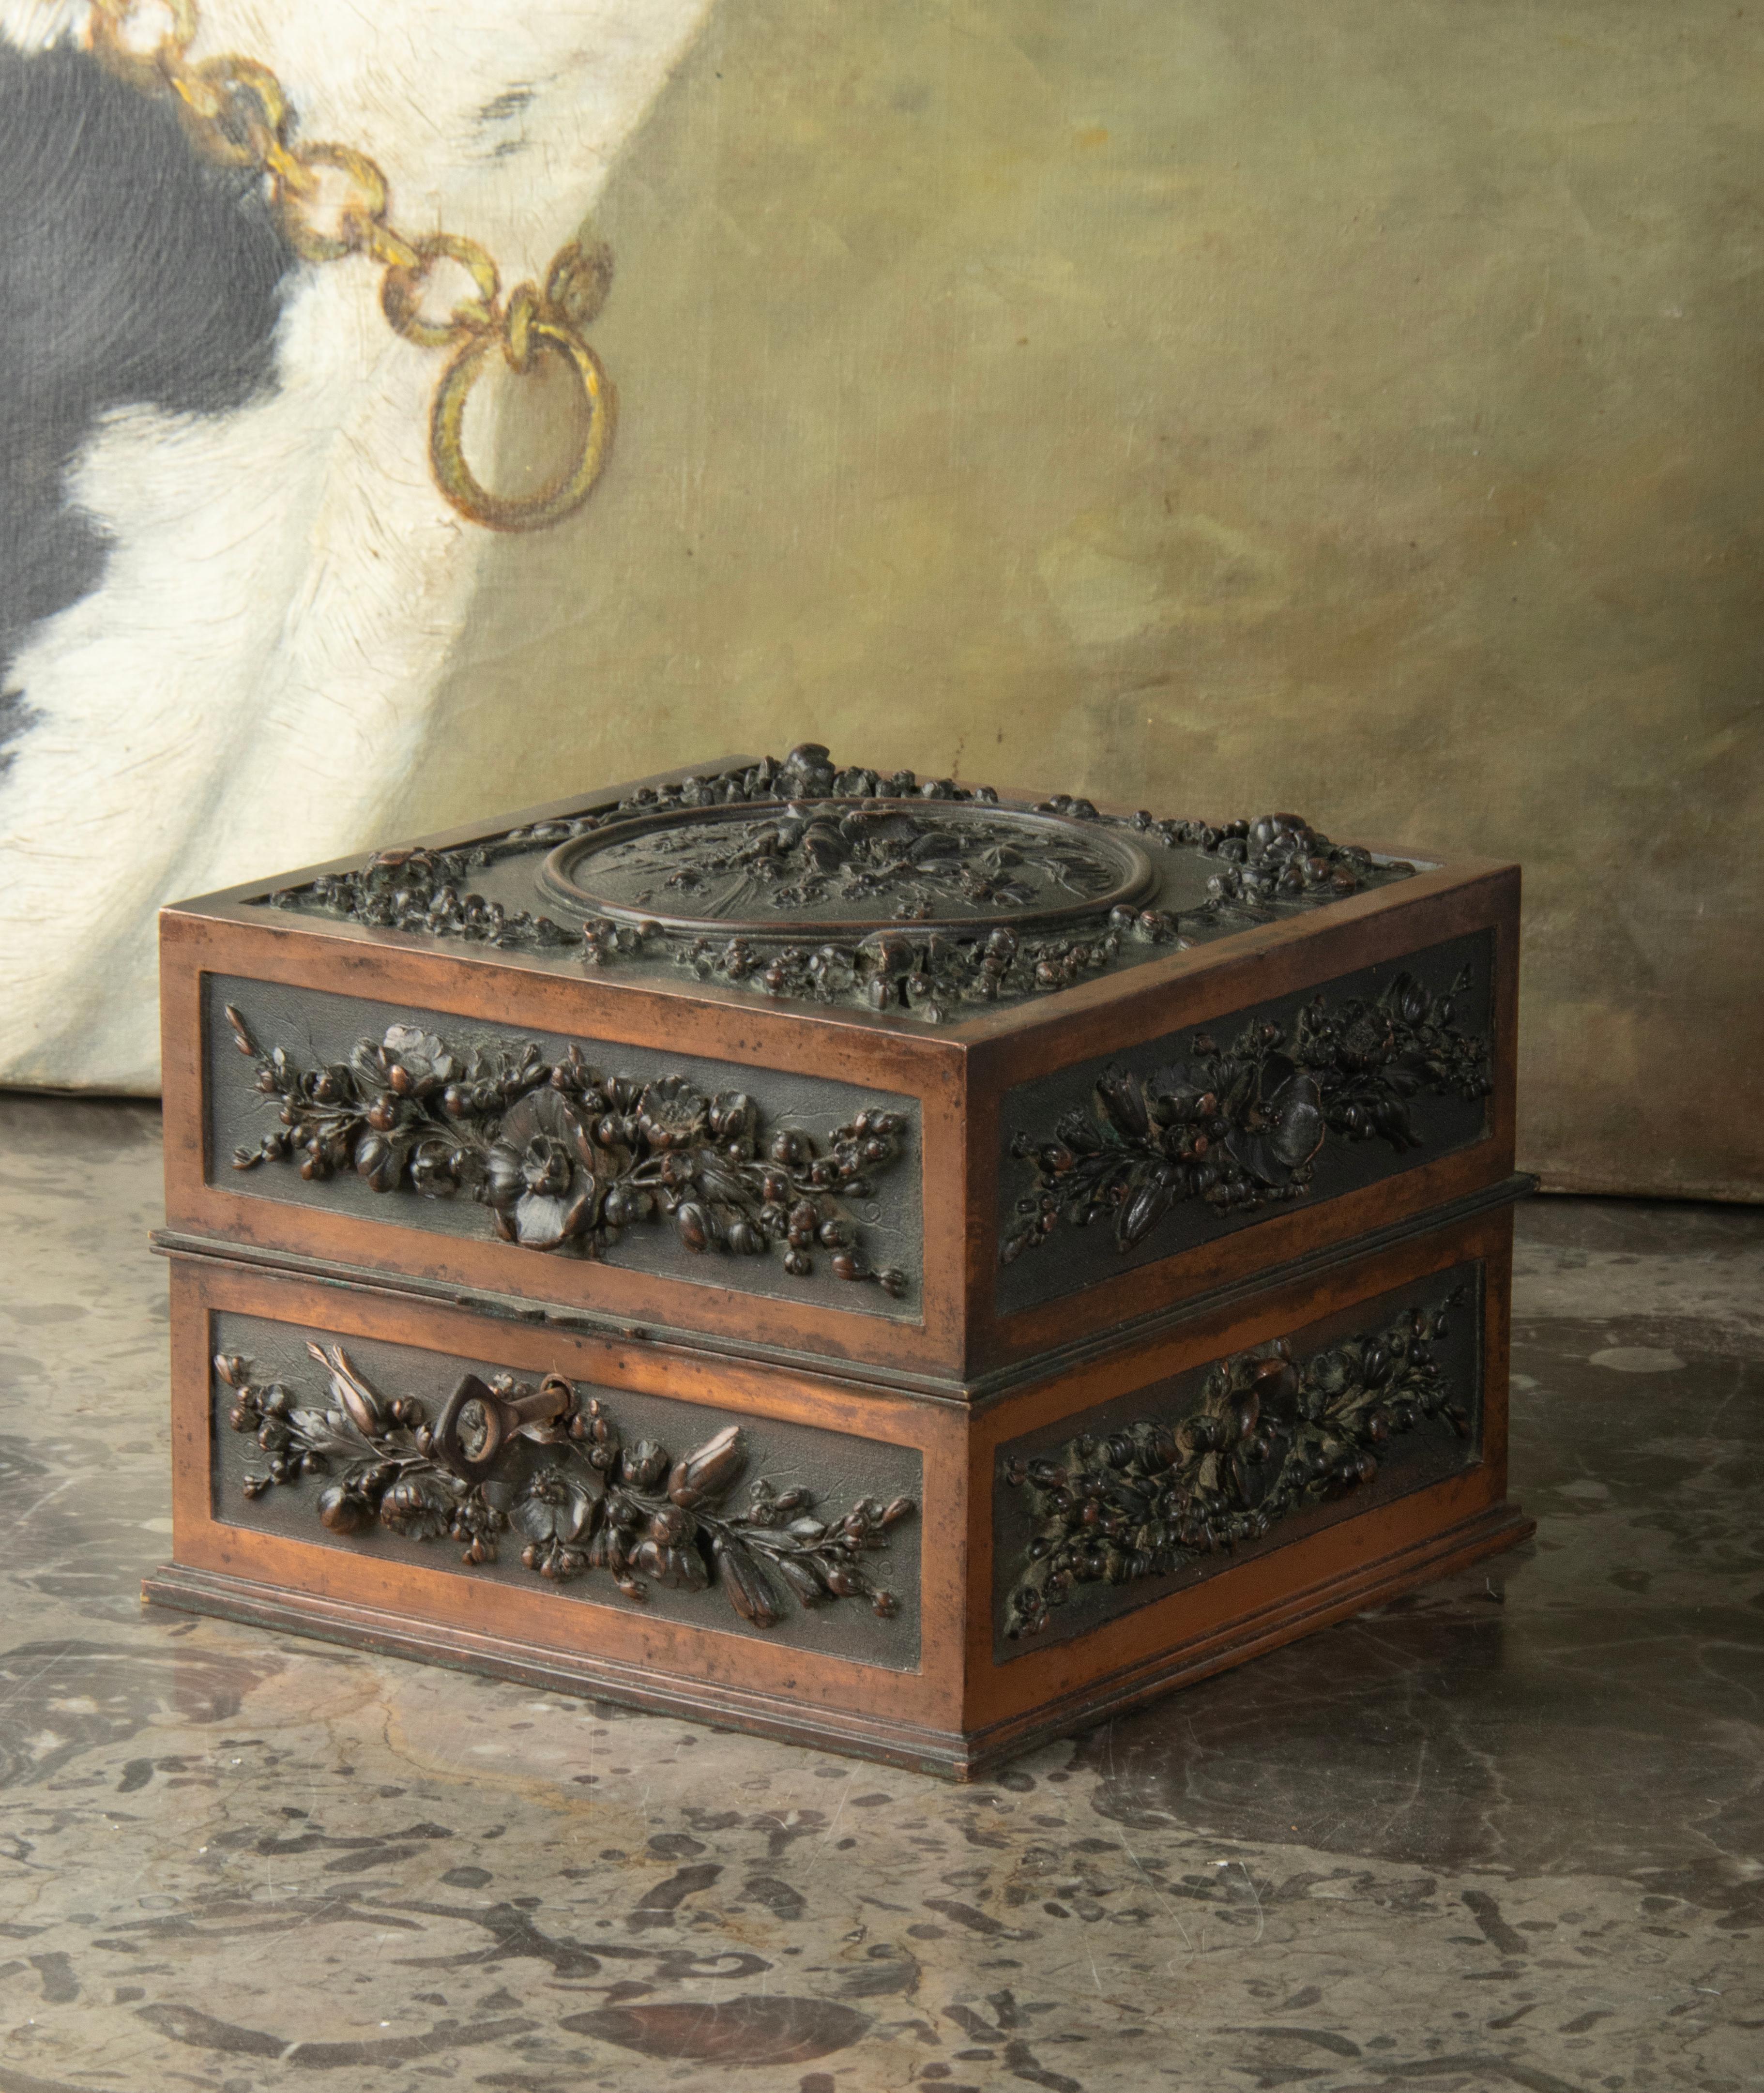 Late 19th Century Black Forest Bronze Decorative Box by Leopold Oudry & Cie. For Sale 2